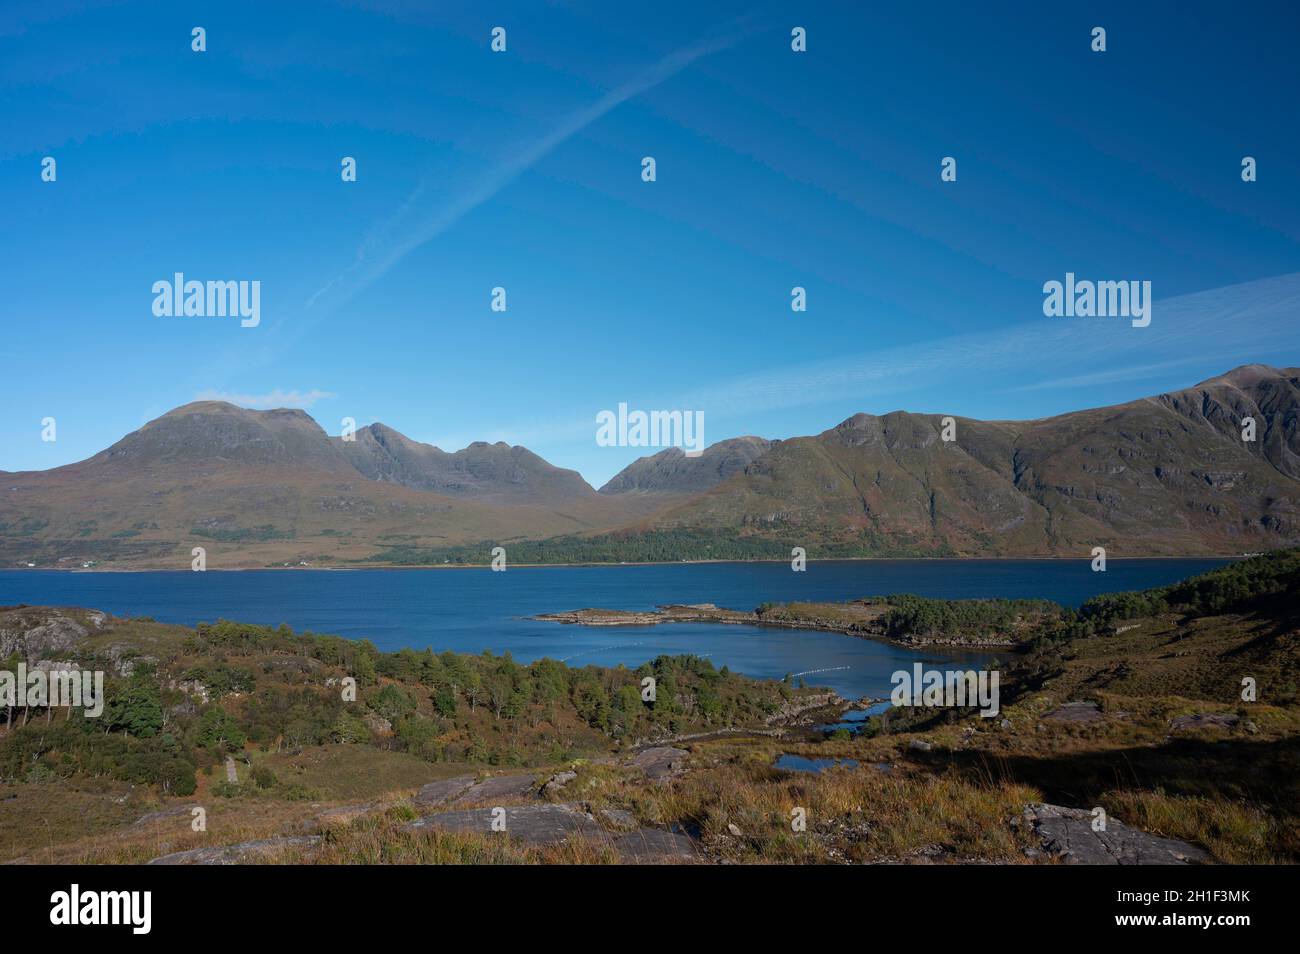 Views over forest and Loch Torridon to Beinn Alligin and Liathach mountains on a sunny day. Blue sky and light cloud with jet stream. No people. Stock Photo